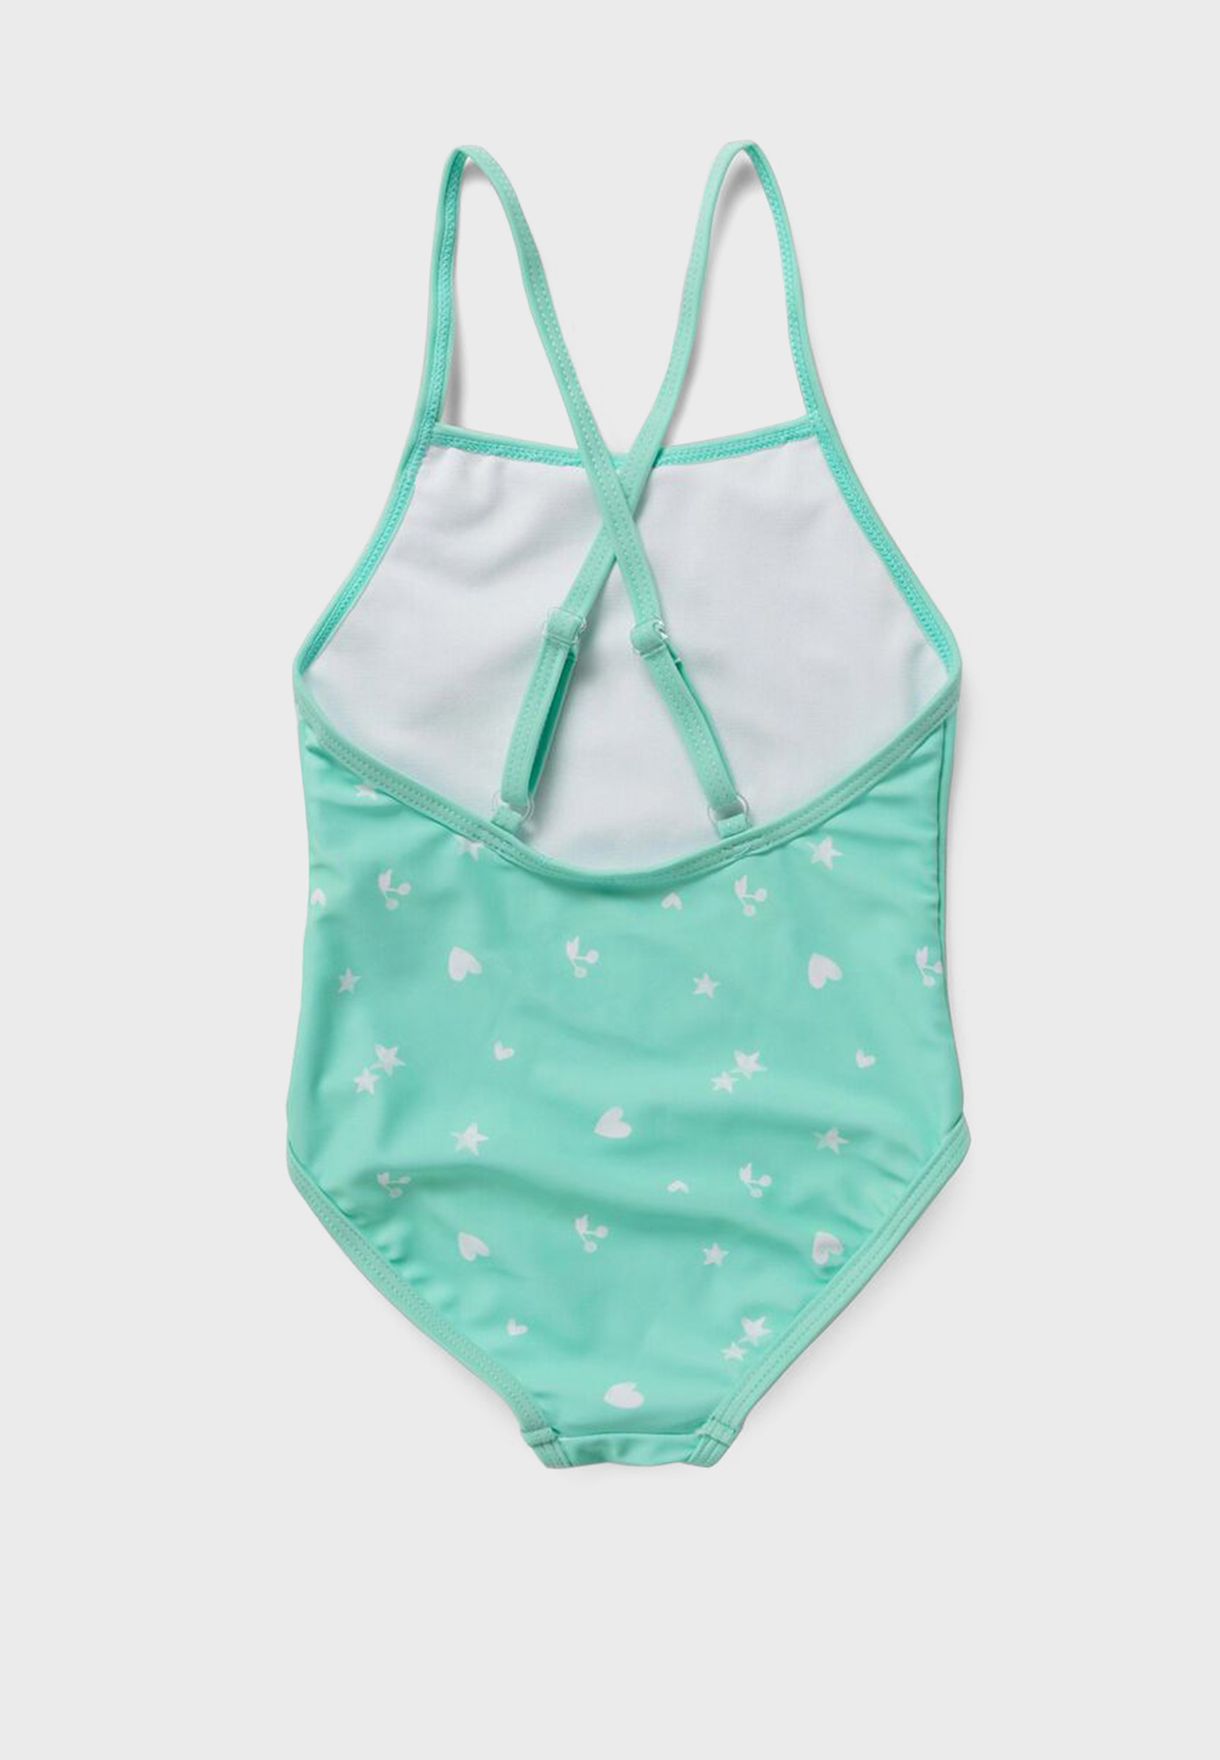 Infant Printed Swimsuit